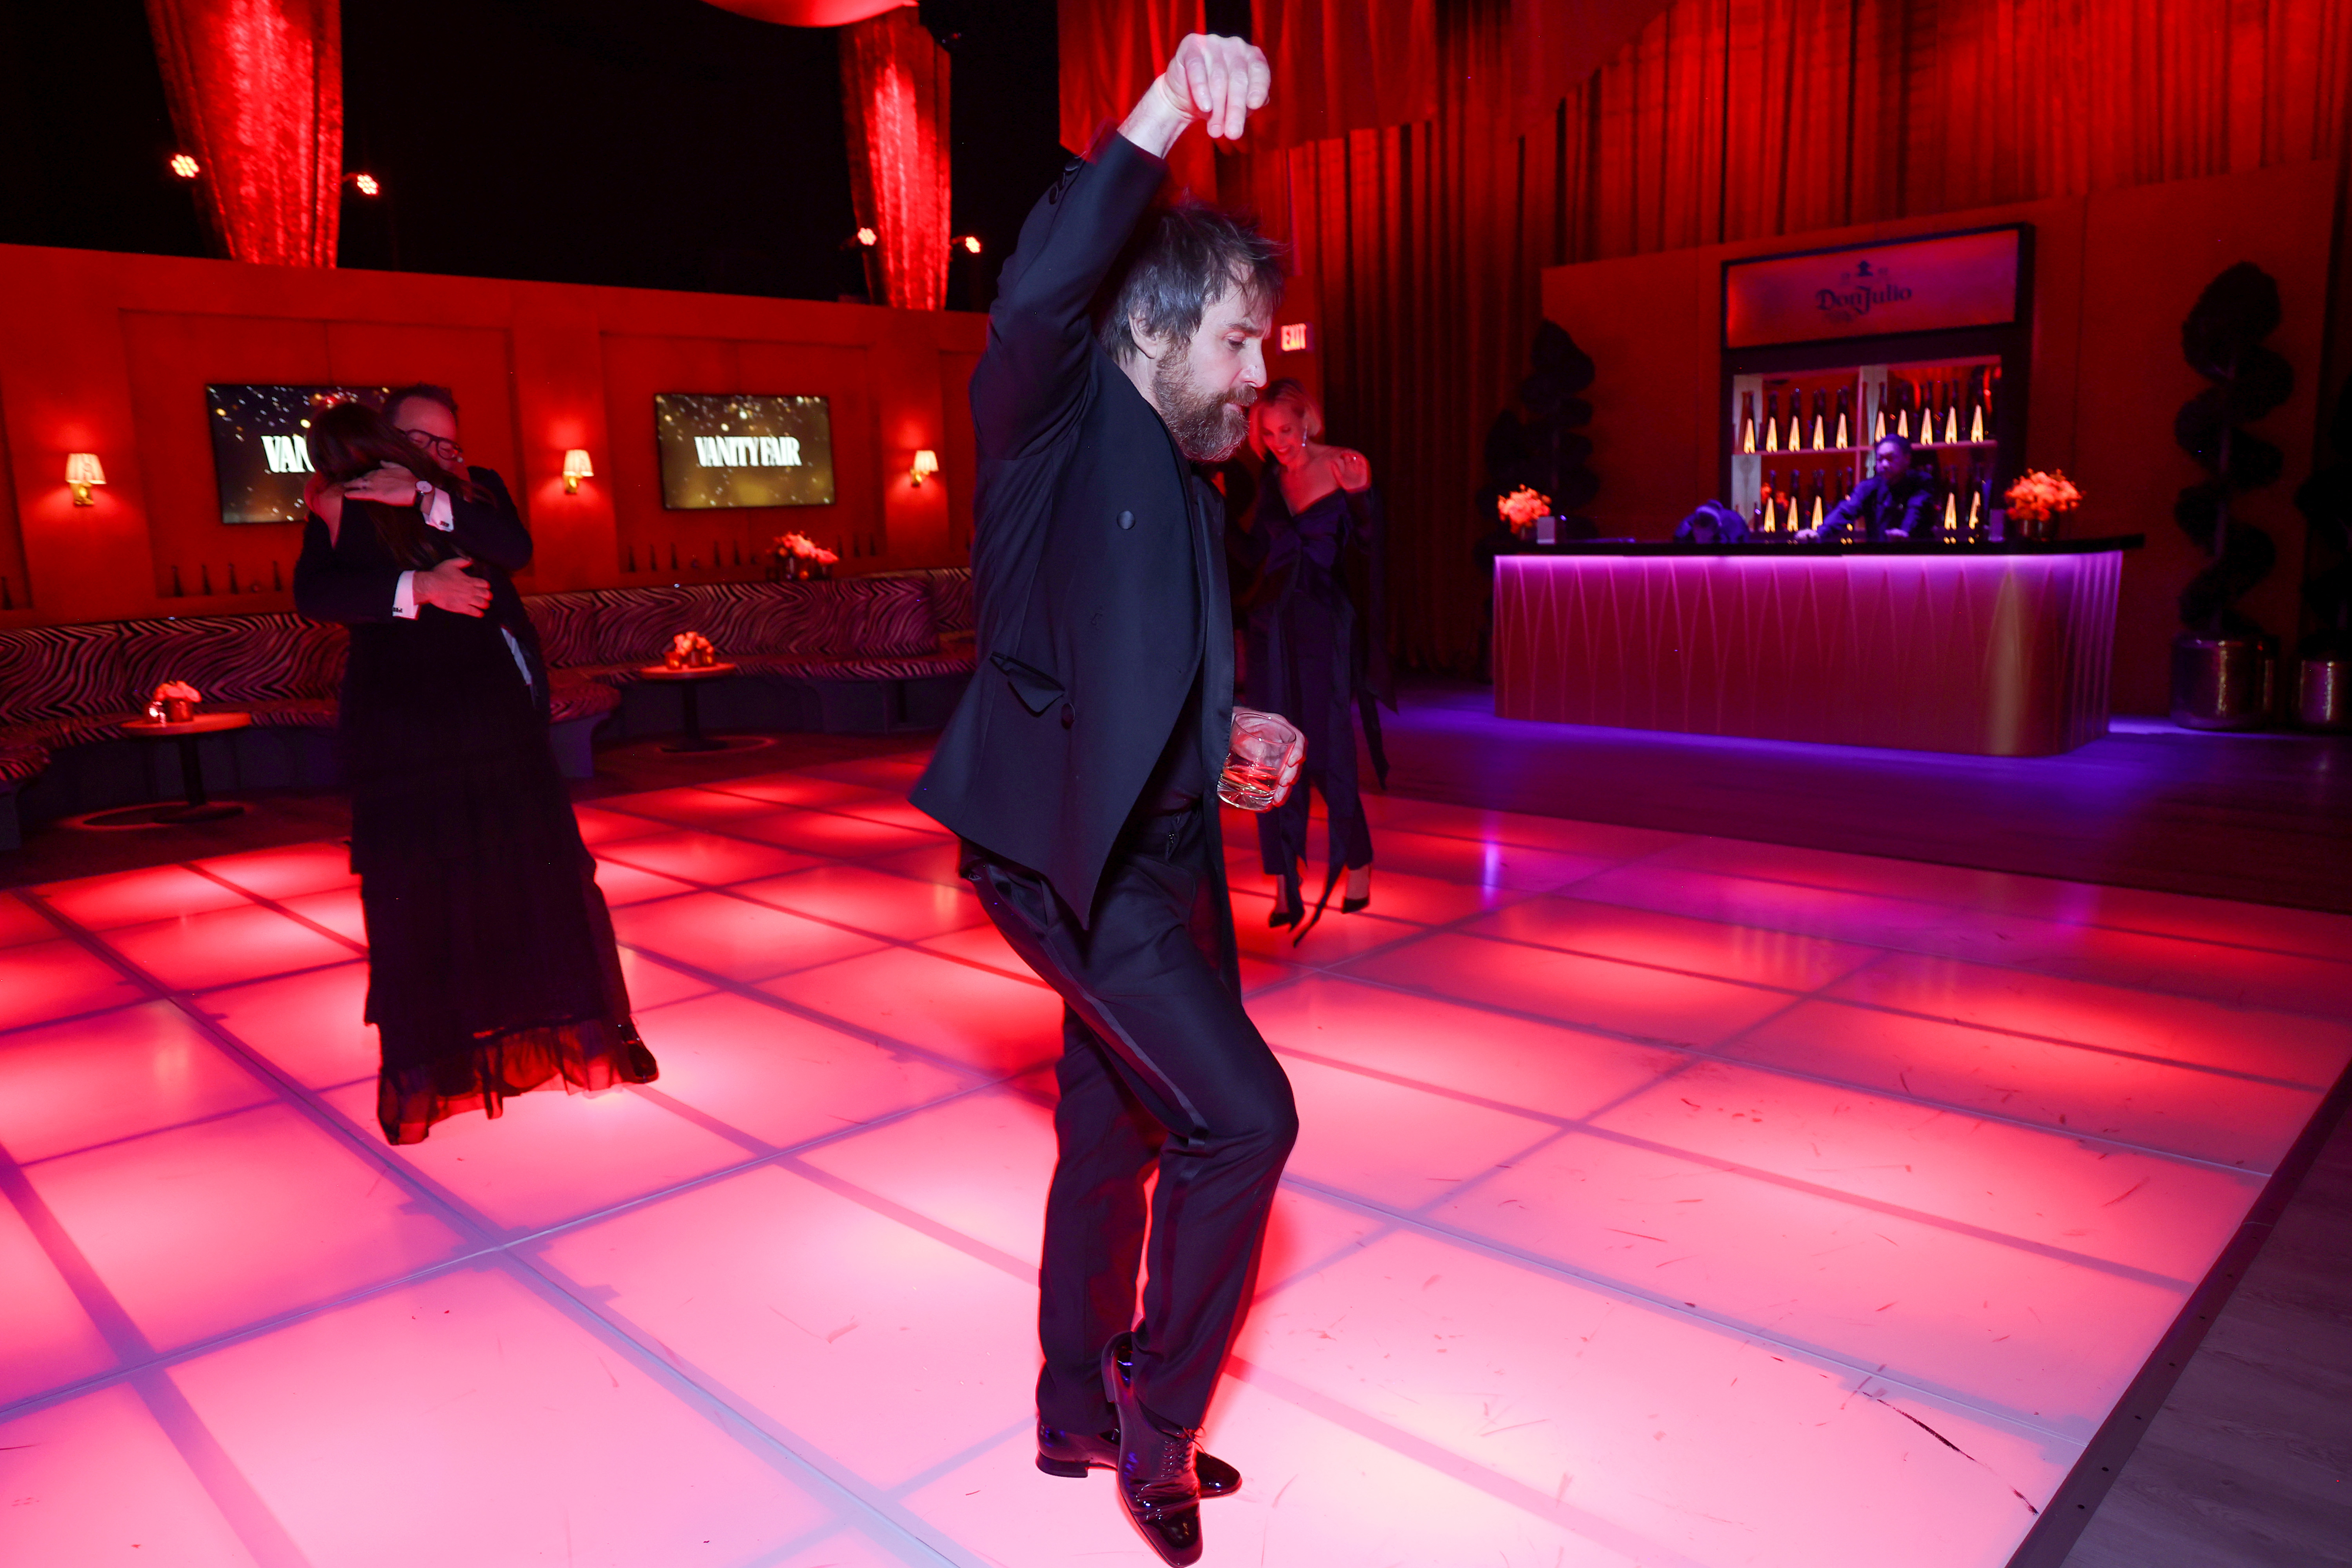 Sam in a suit dancing with a raised fist on a lit dance floor, other couples in background